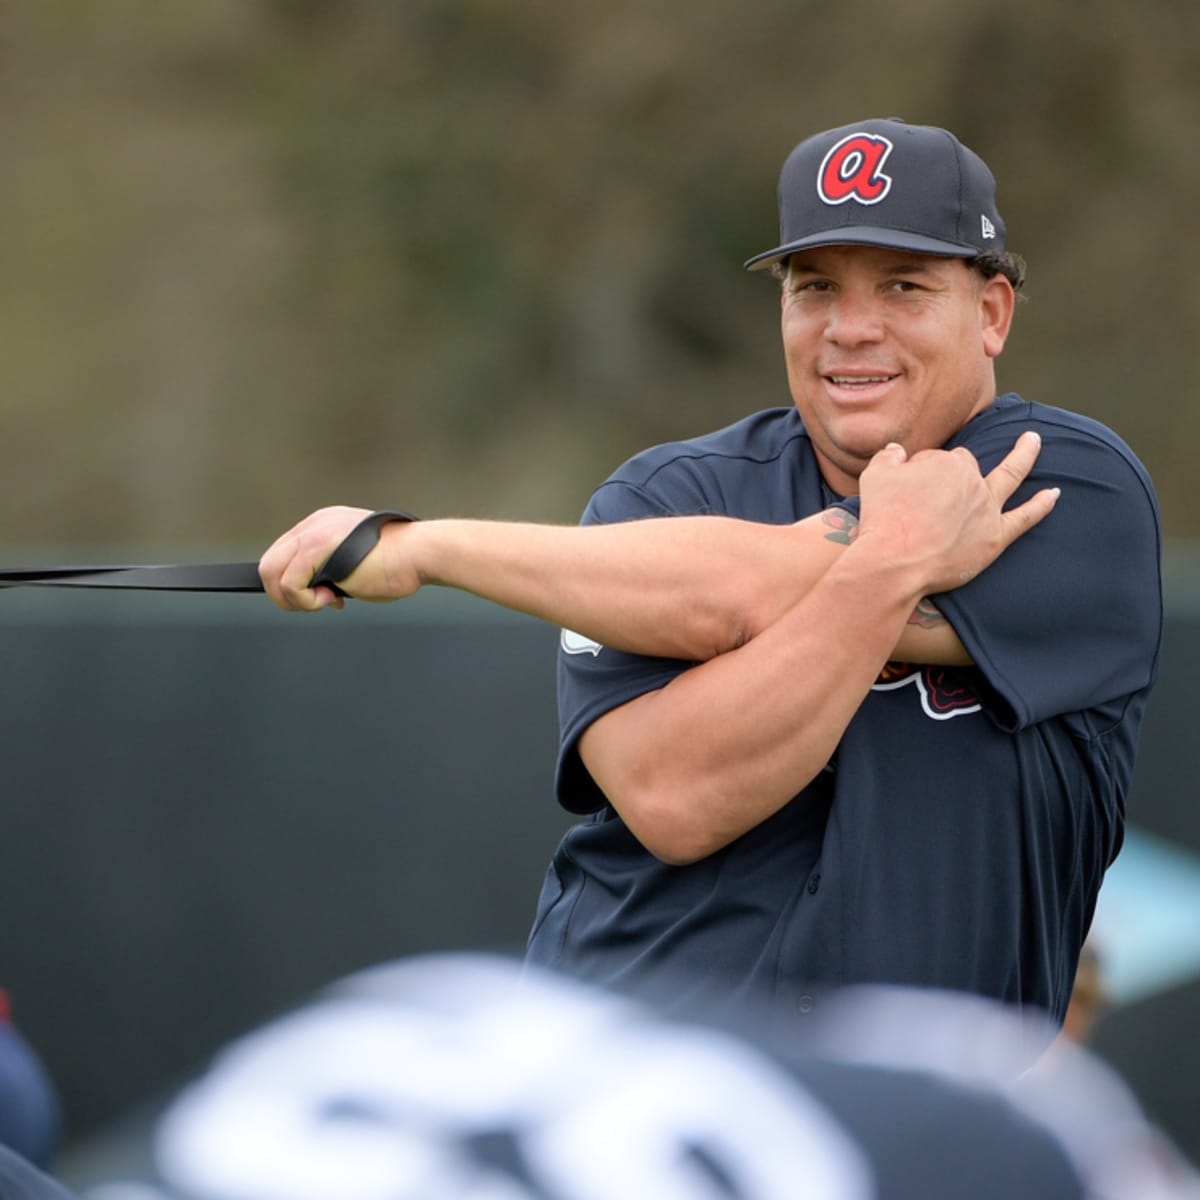 Bartolo Colon dumped by Braves; is this the end for rotund righty?